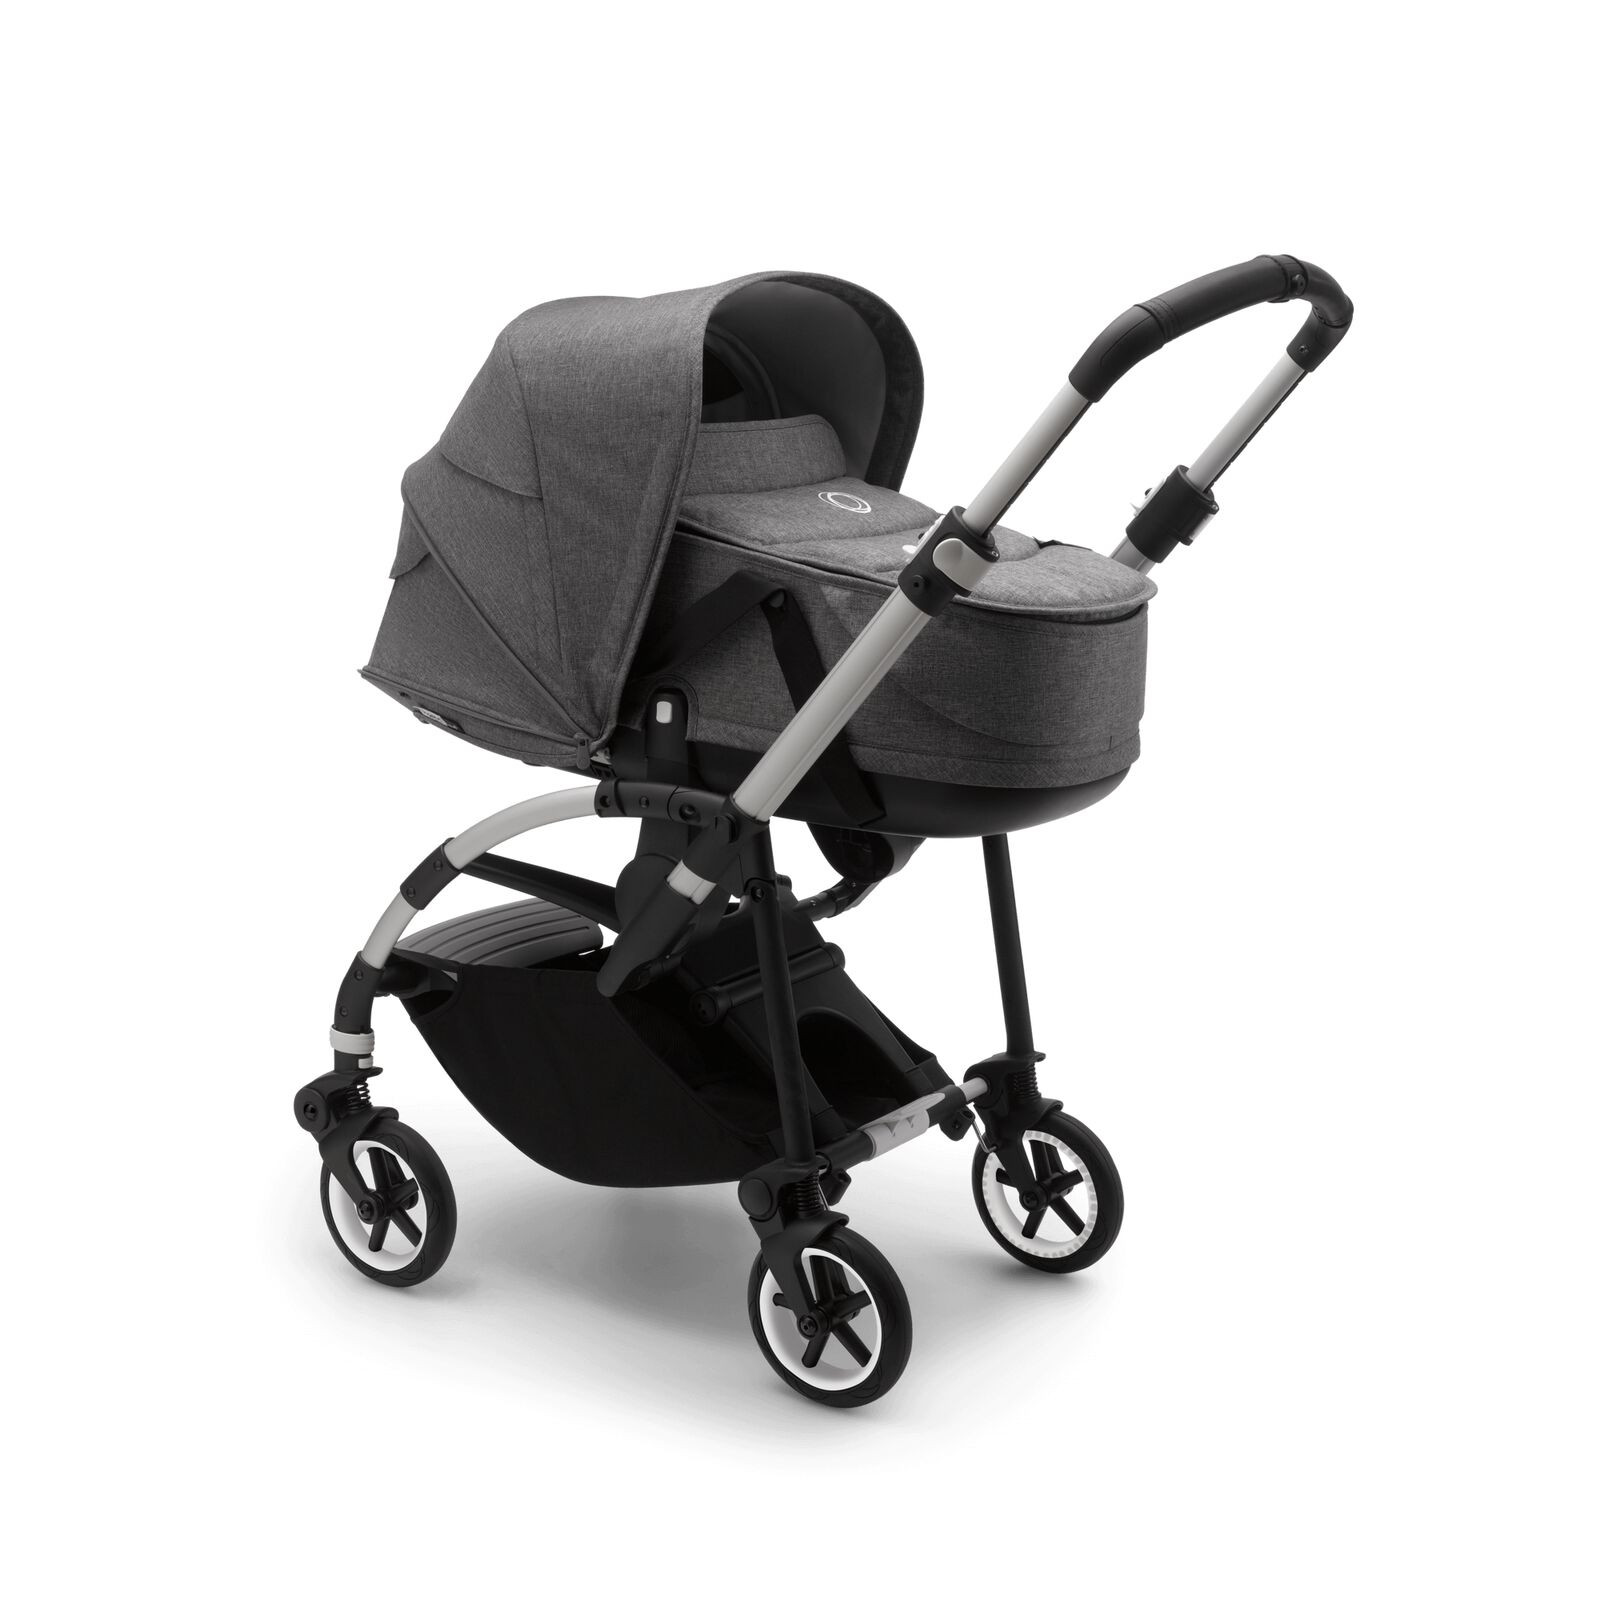 Bugaboo Bee 6 seat and bassinet stroller - View 4